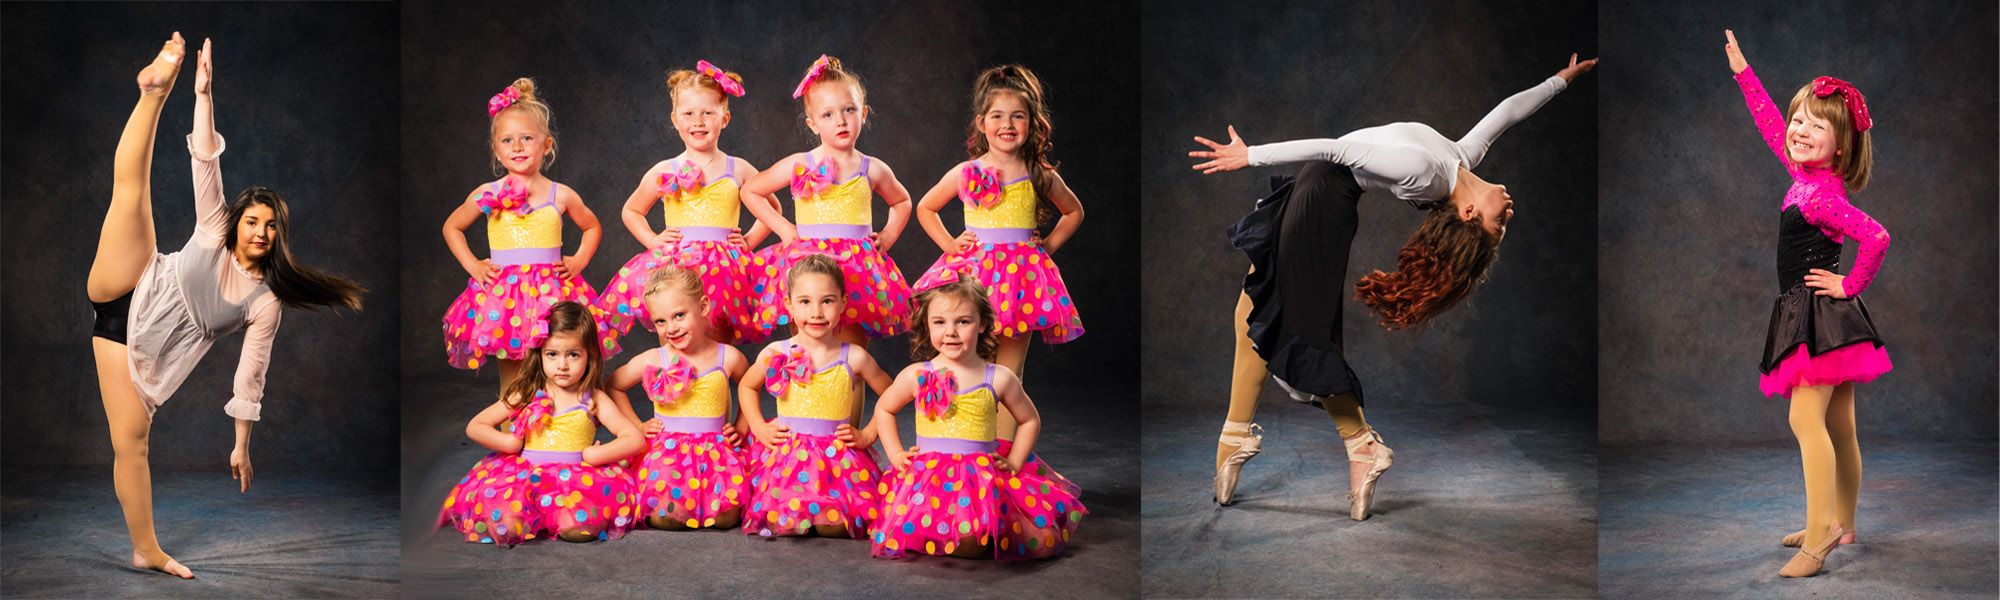 Dance Classes and Lessons for Children & Competition Dancers